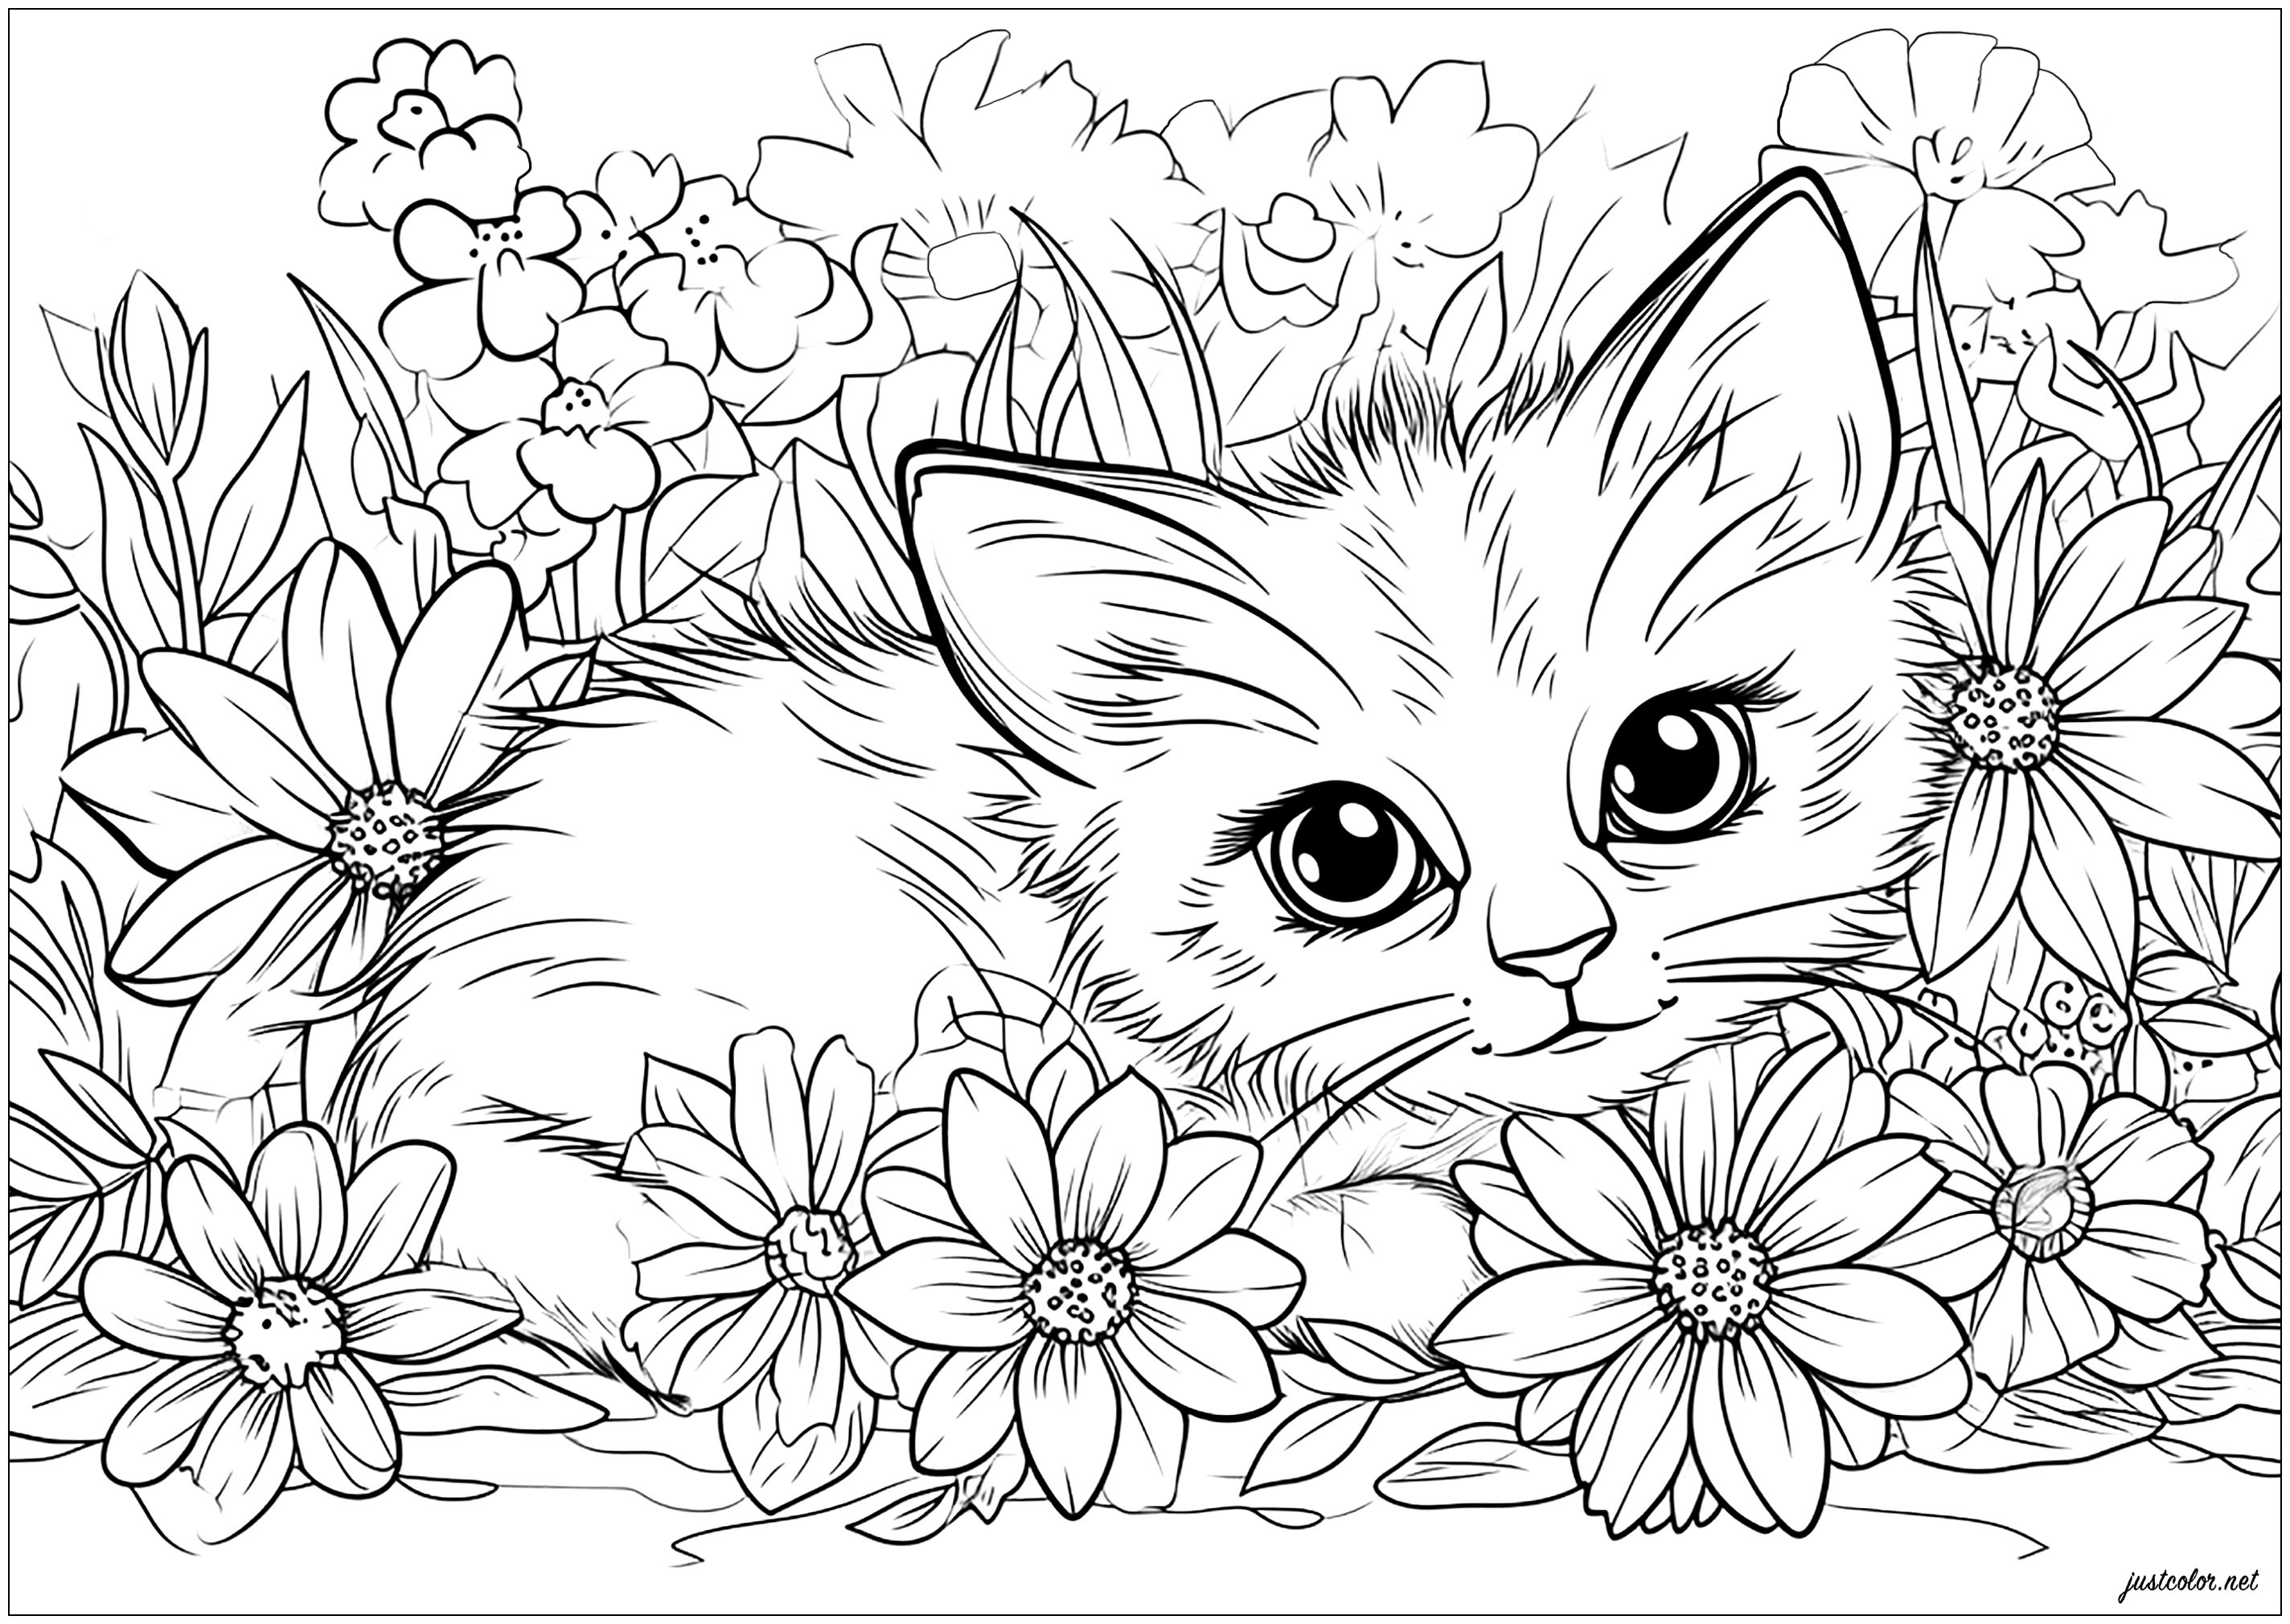 Coloring page : Cats - 5